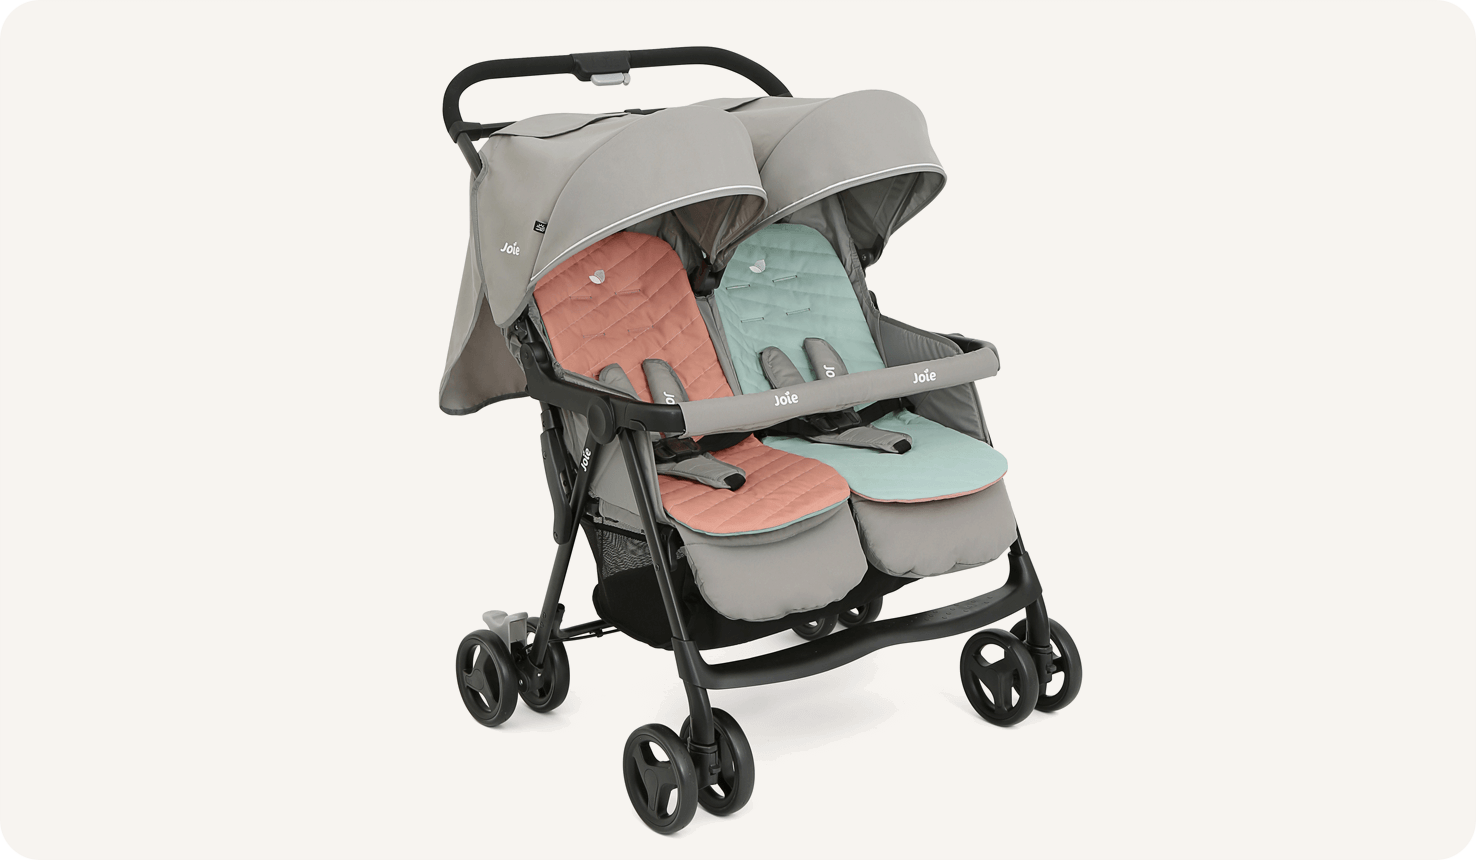   The Joie Aire Twin side-by-side double stroller in light gray at an angle, with a peach coloured seat insert on the left seat and a light blue insert on the right seat.